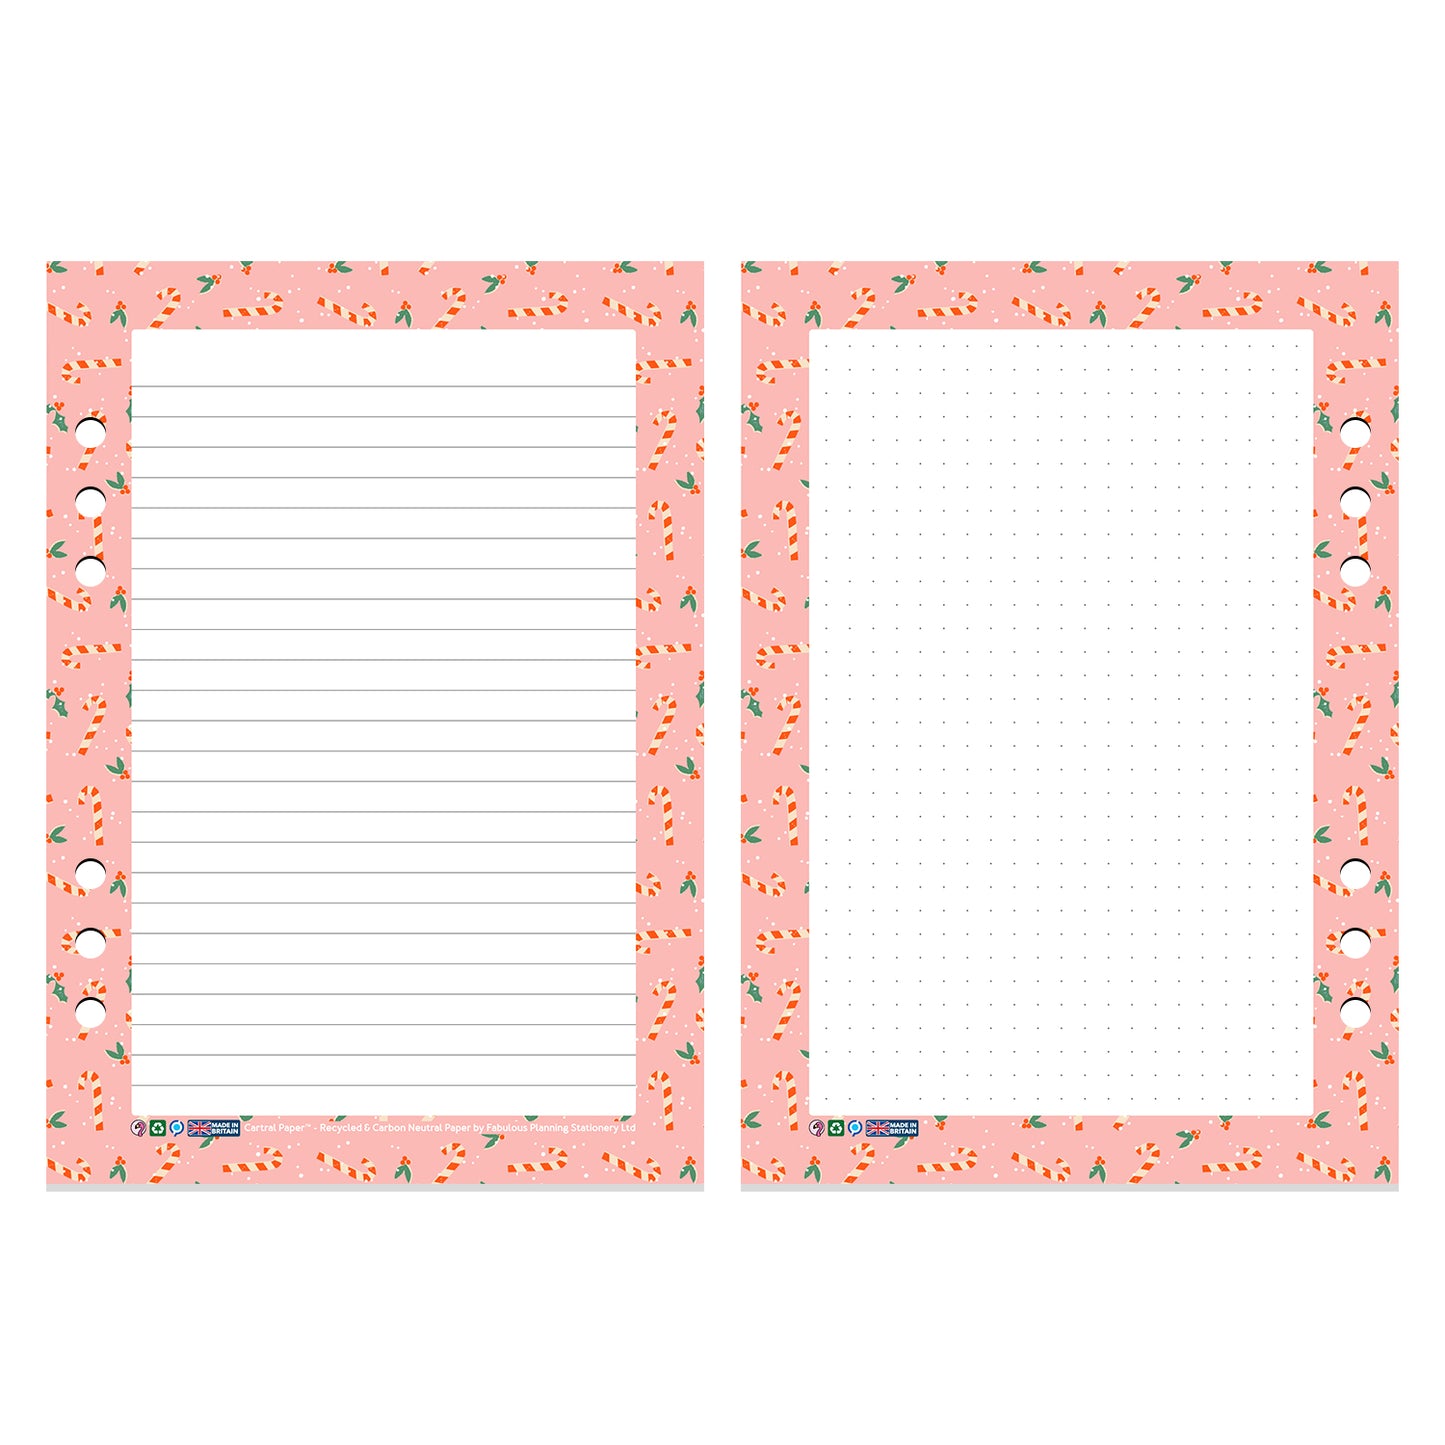 A5 - Cartral Paper - Insert - Candy Cane Lane